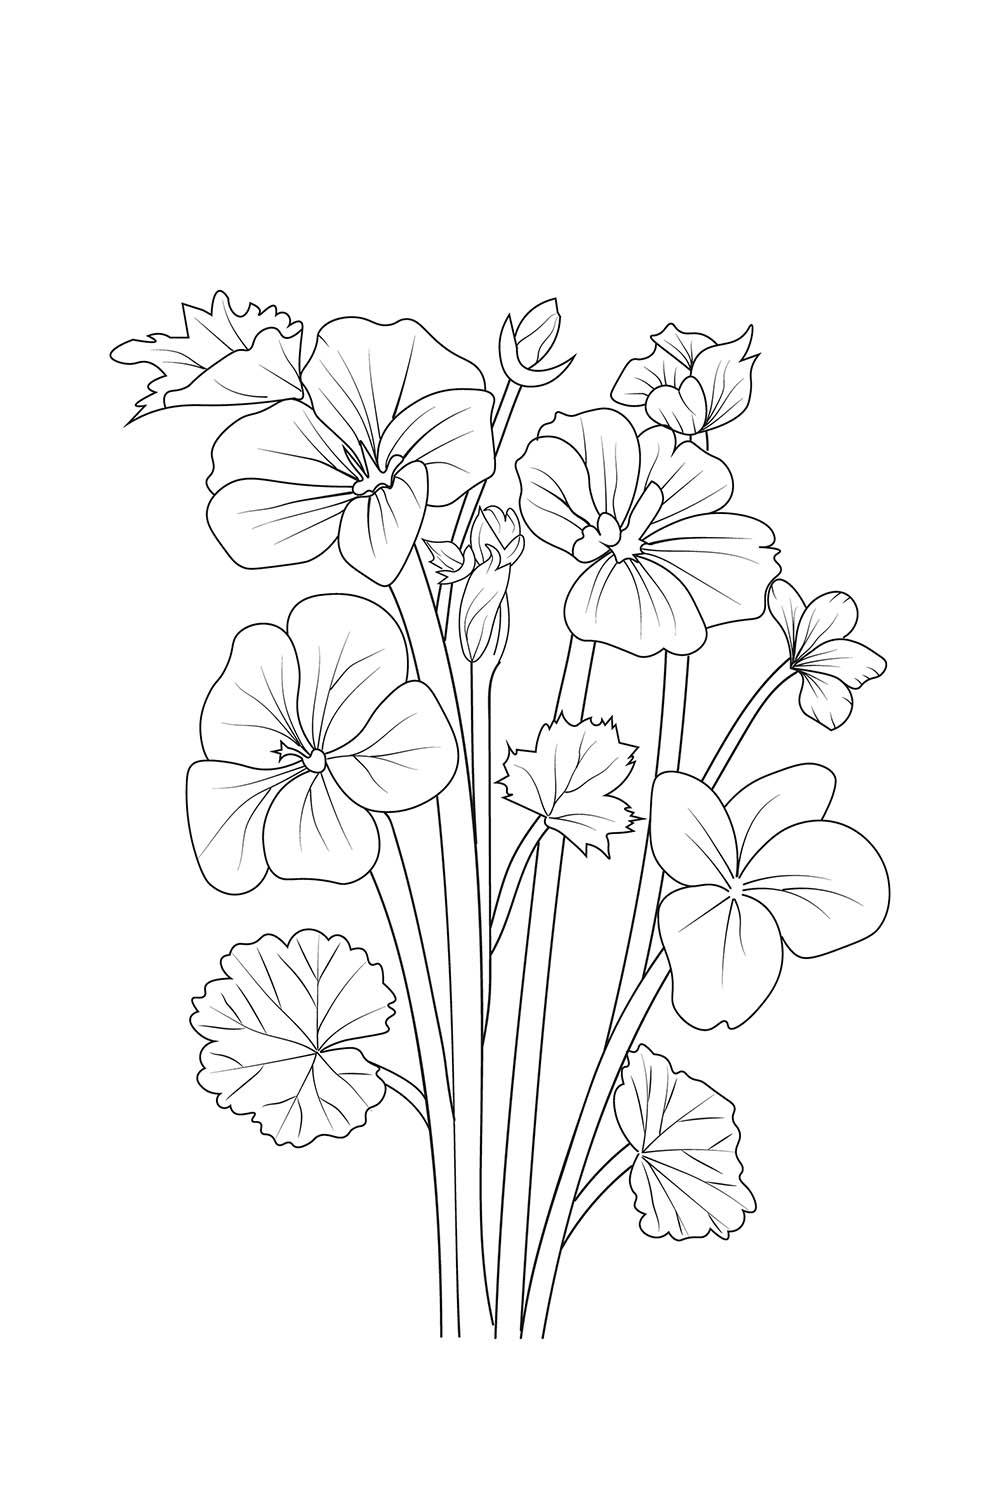 February birth flower, February primrose birth flower, February birth primrose drawings, primula flower drawing pinterest preview image.